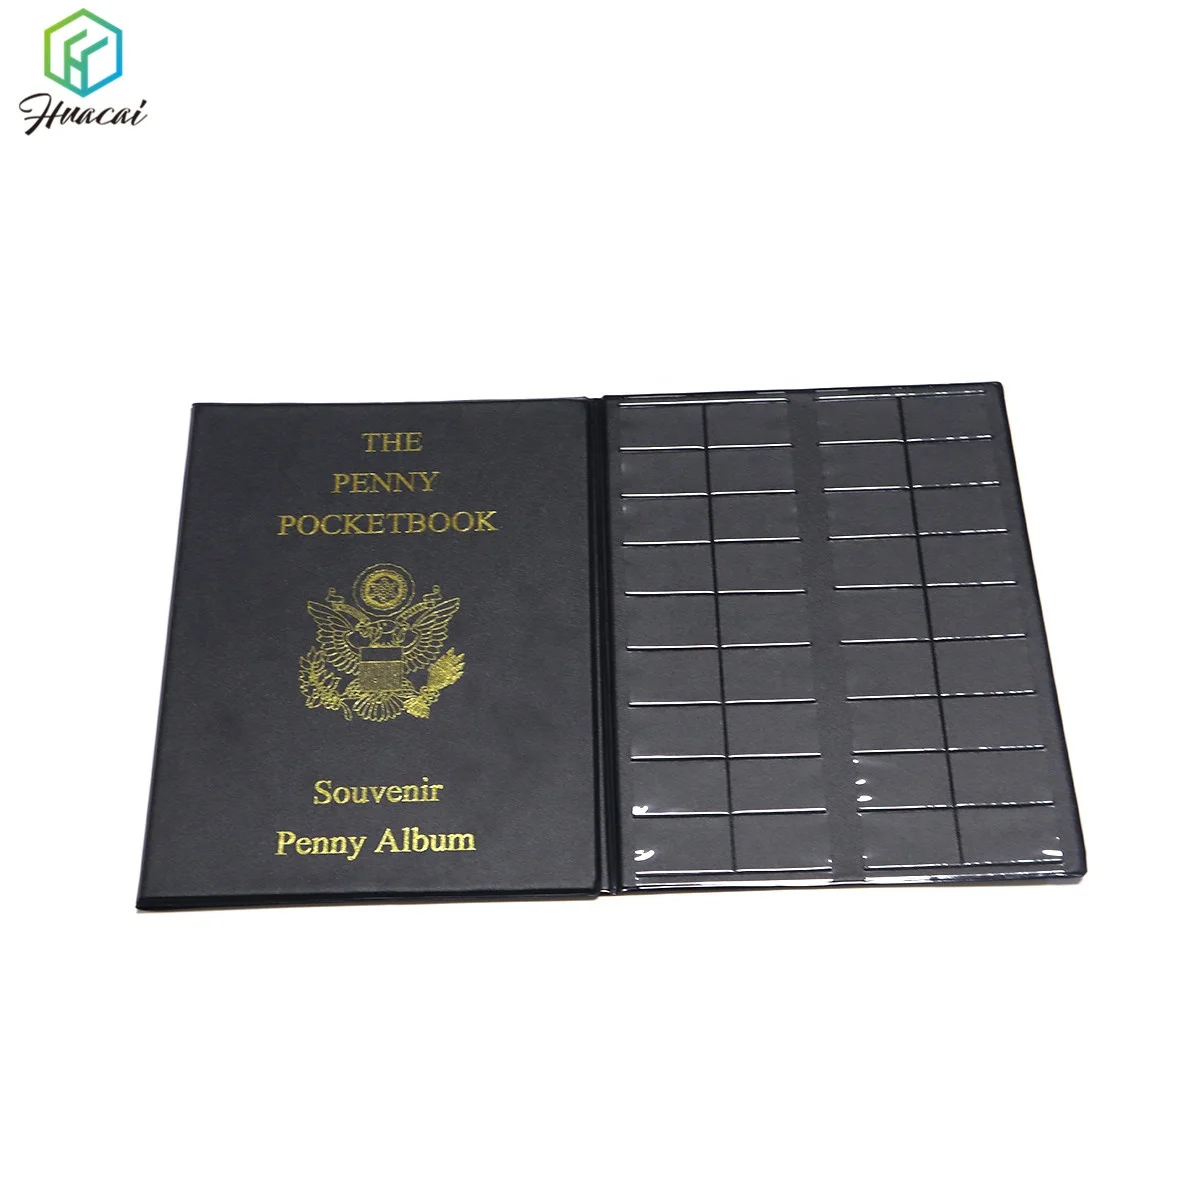 PENNY PASSPORT ELONGATED PENNY ALBUM BOOK NEW WITH FREE PENNY 